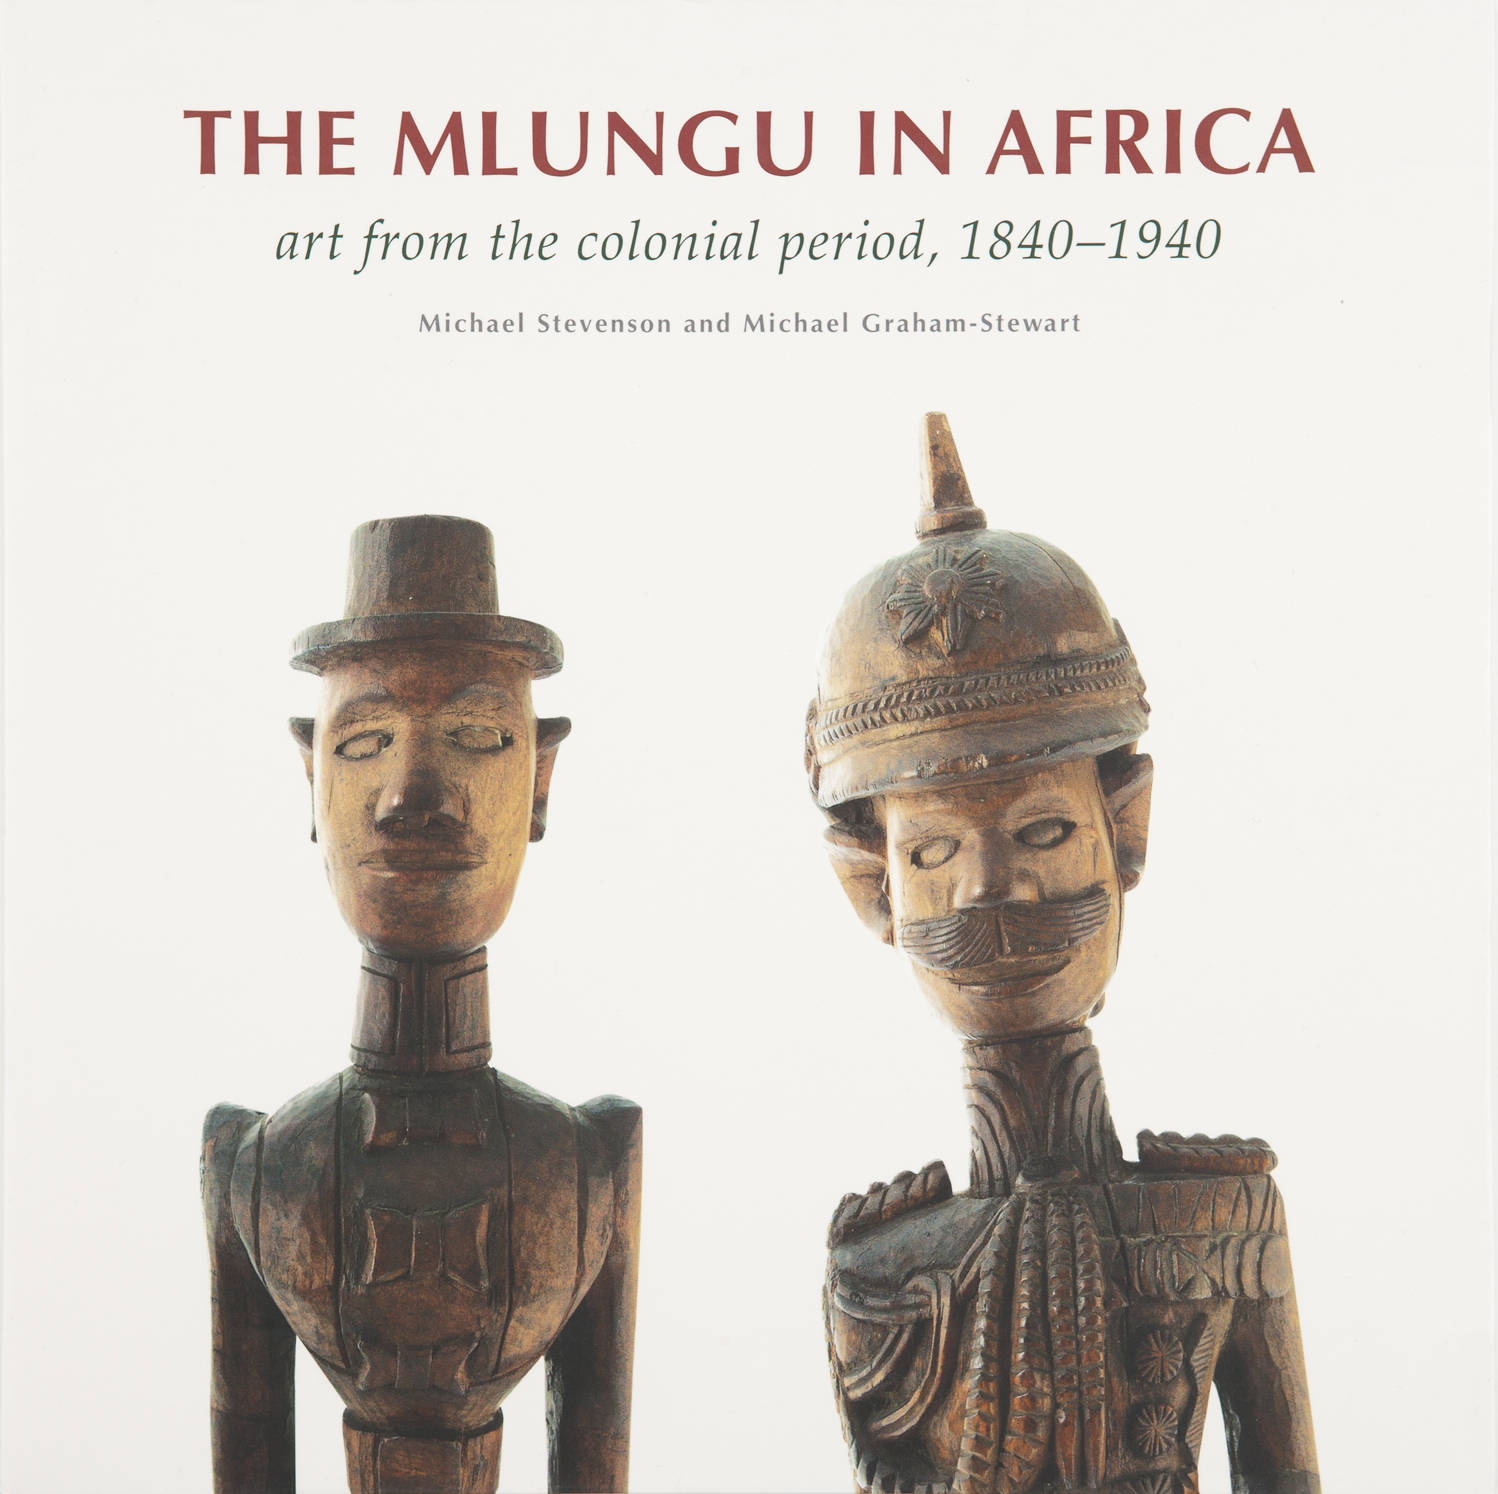 The Mlungu in Africa: Art from the colonial period, 1840-1940